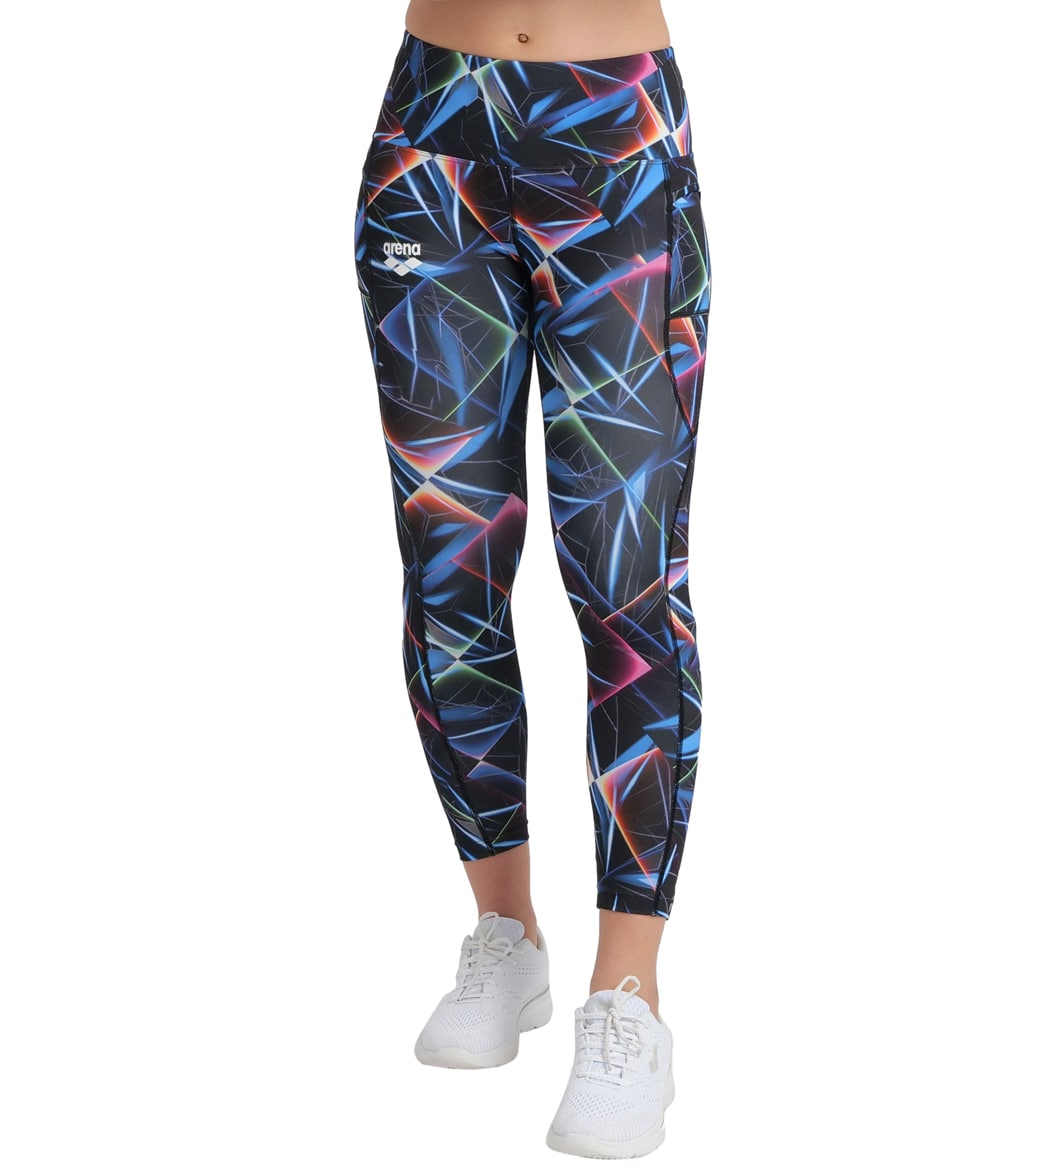 Arena Women's 7/8 Panel Tights at